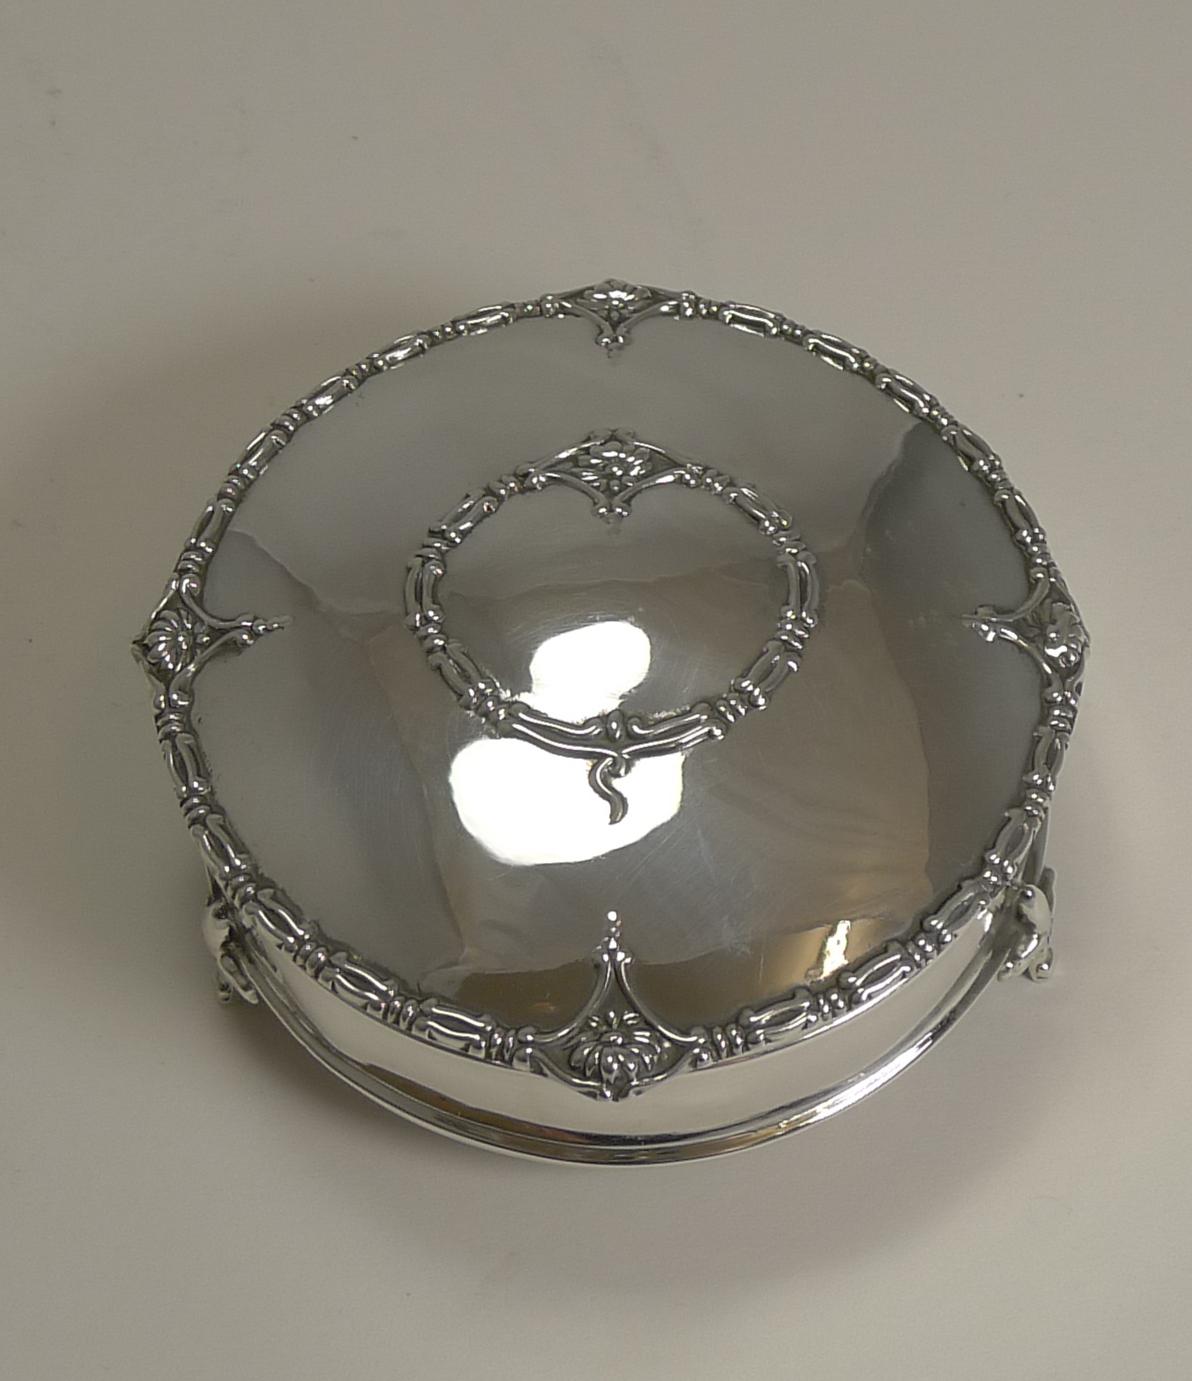 A beautifully decorated sterling silver jewellery or ring box standing on three elegant Fleur-de-Lys legs.

The lid is pretty as a picture with a raised border and a centrally framed vacant cartouche. The silver is fully hallmarked for Birmingham